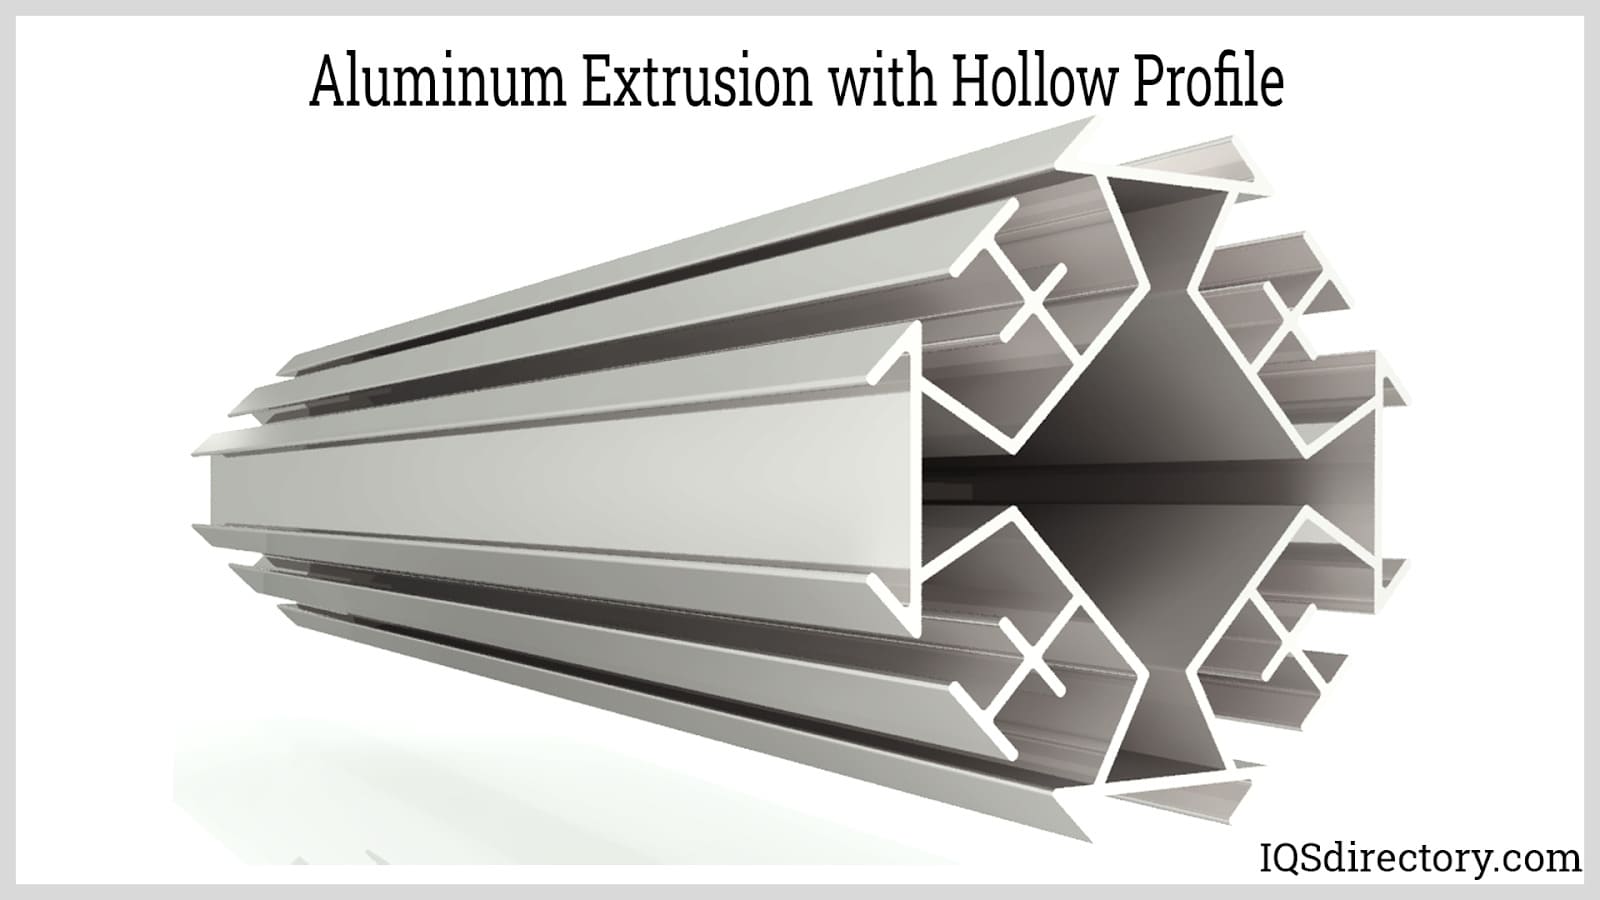 Aluminum Extrusion with Hollow Profile